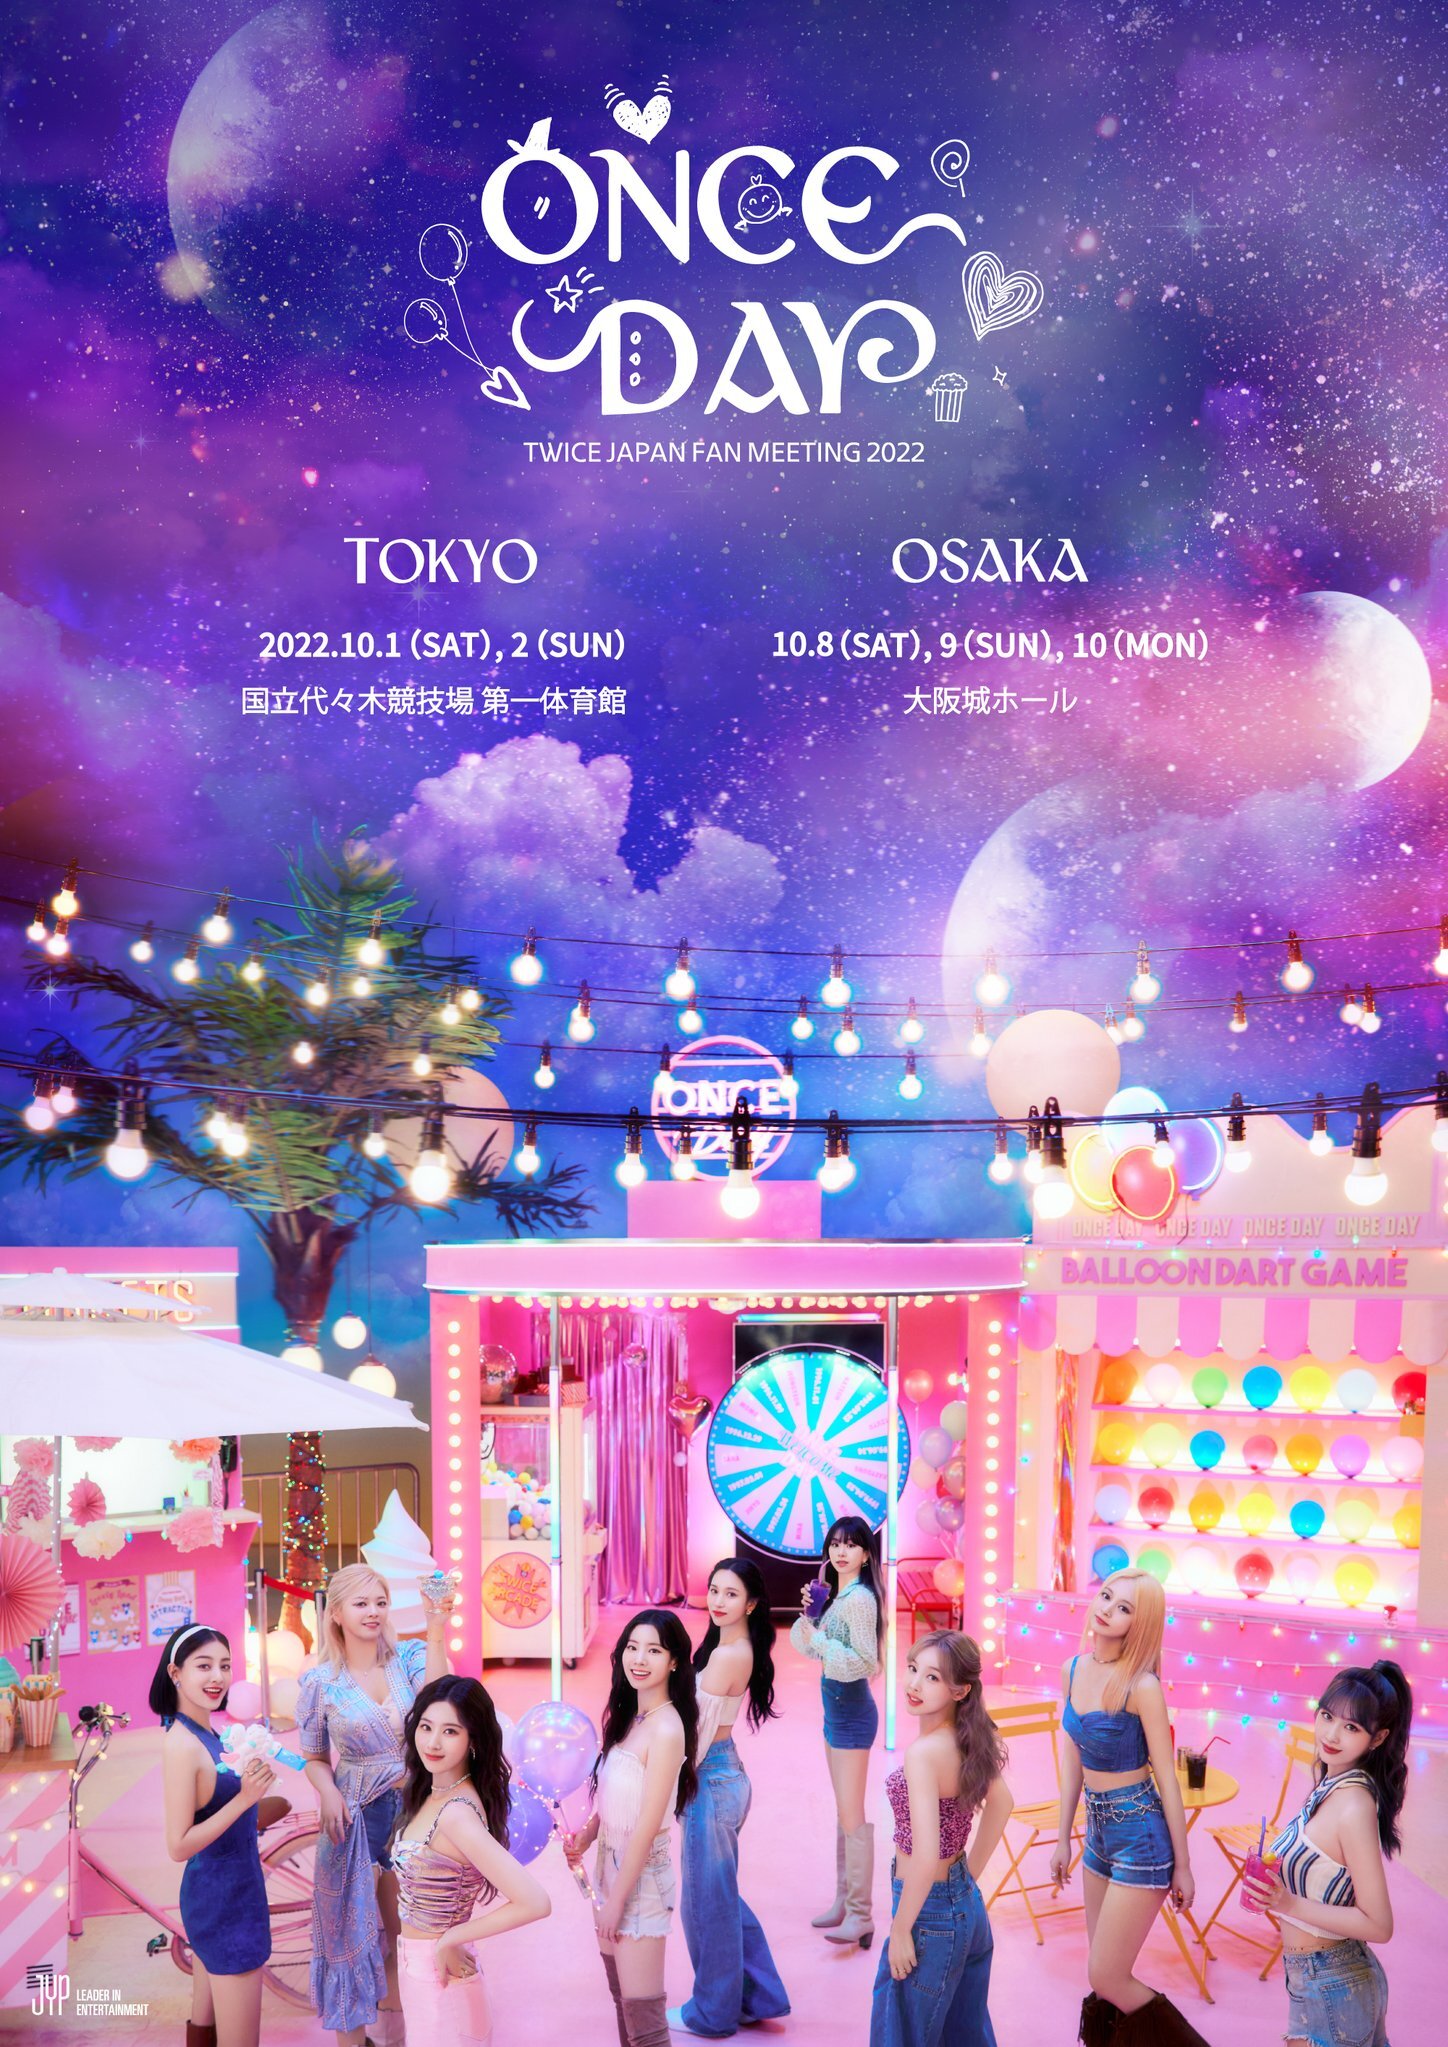 TWICE Japan Fan Meeting 2022 “Once Day” Teasers | kpopping